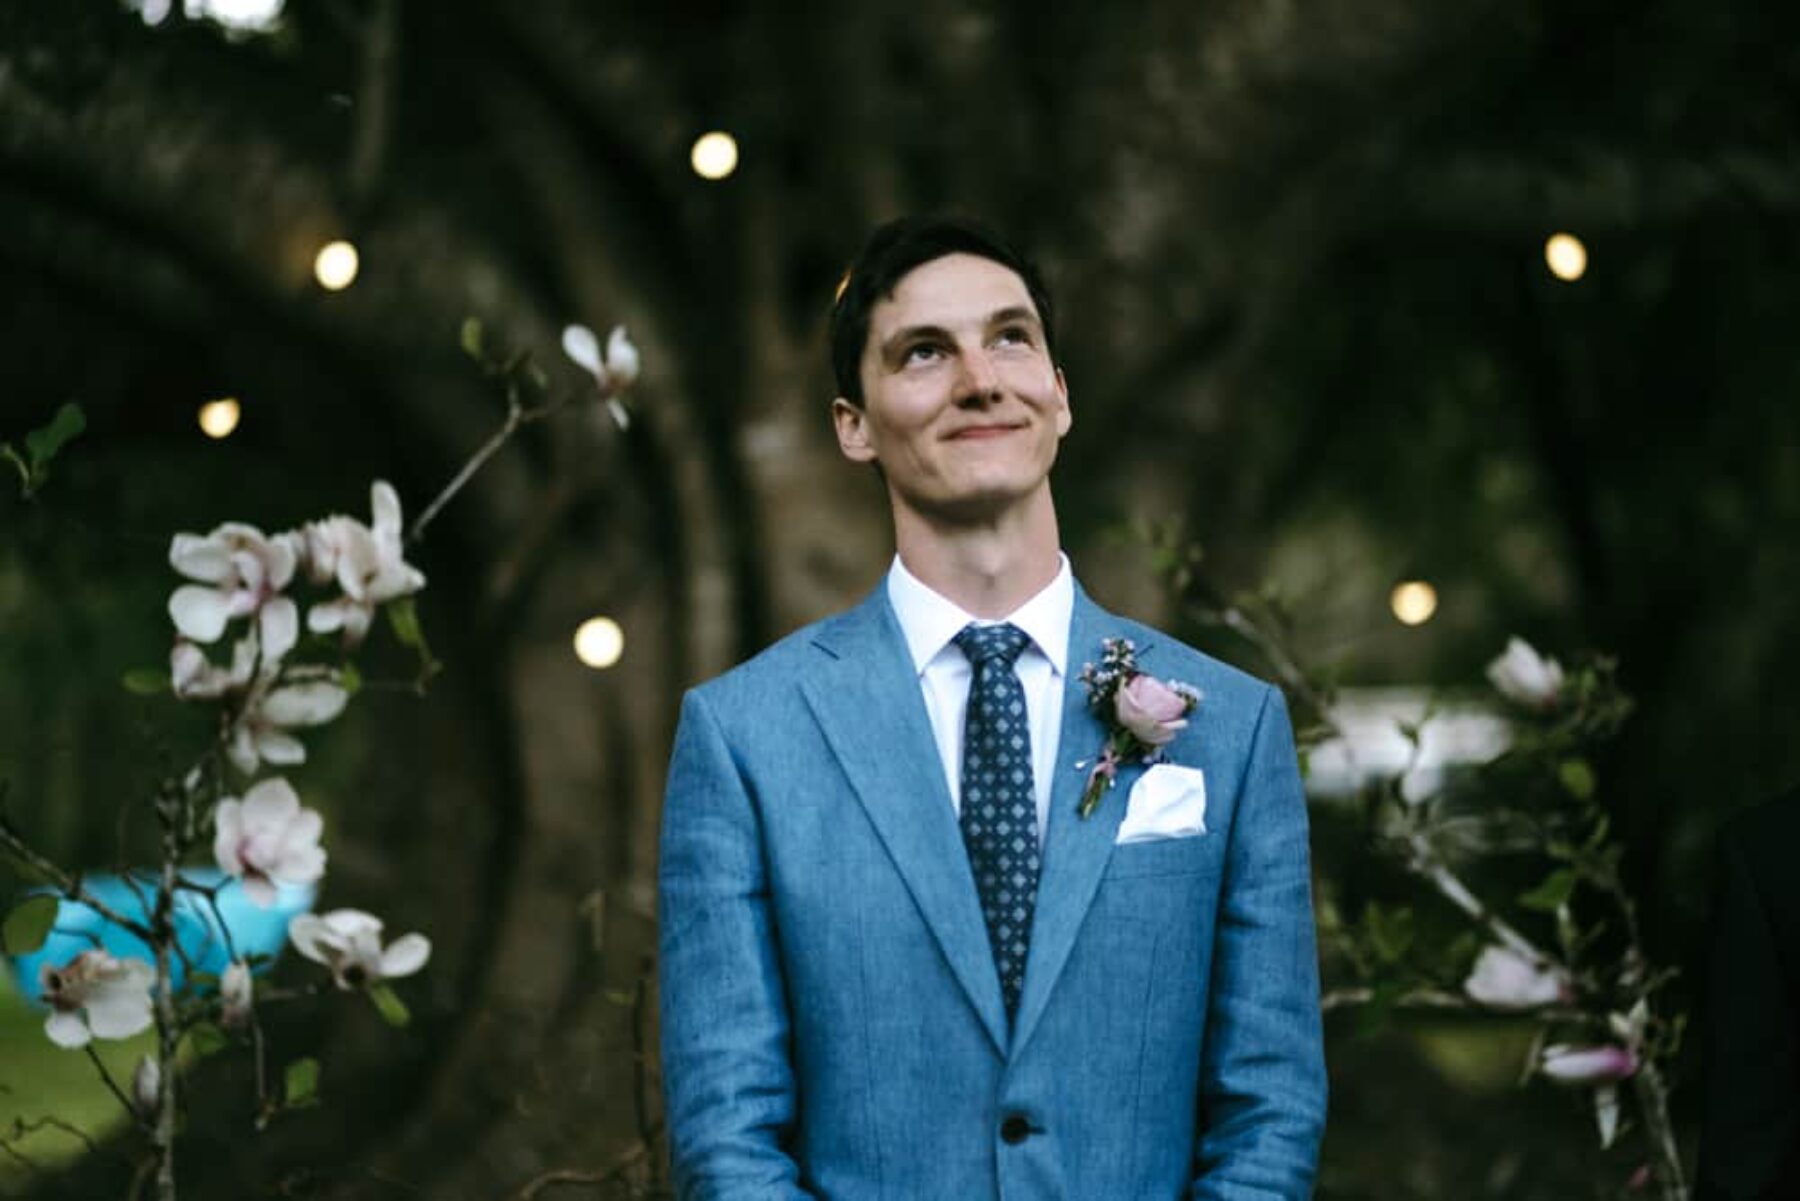 Stylish groom in blue suit by Oscacr Hunt